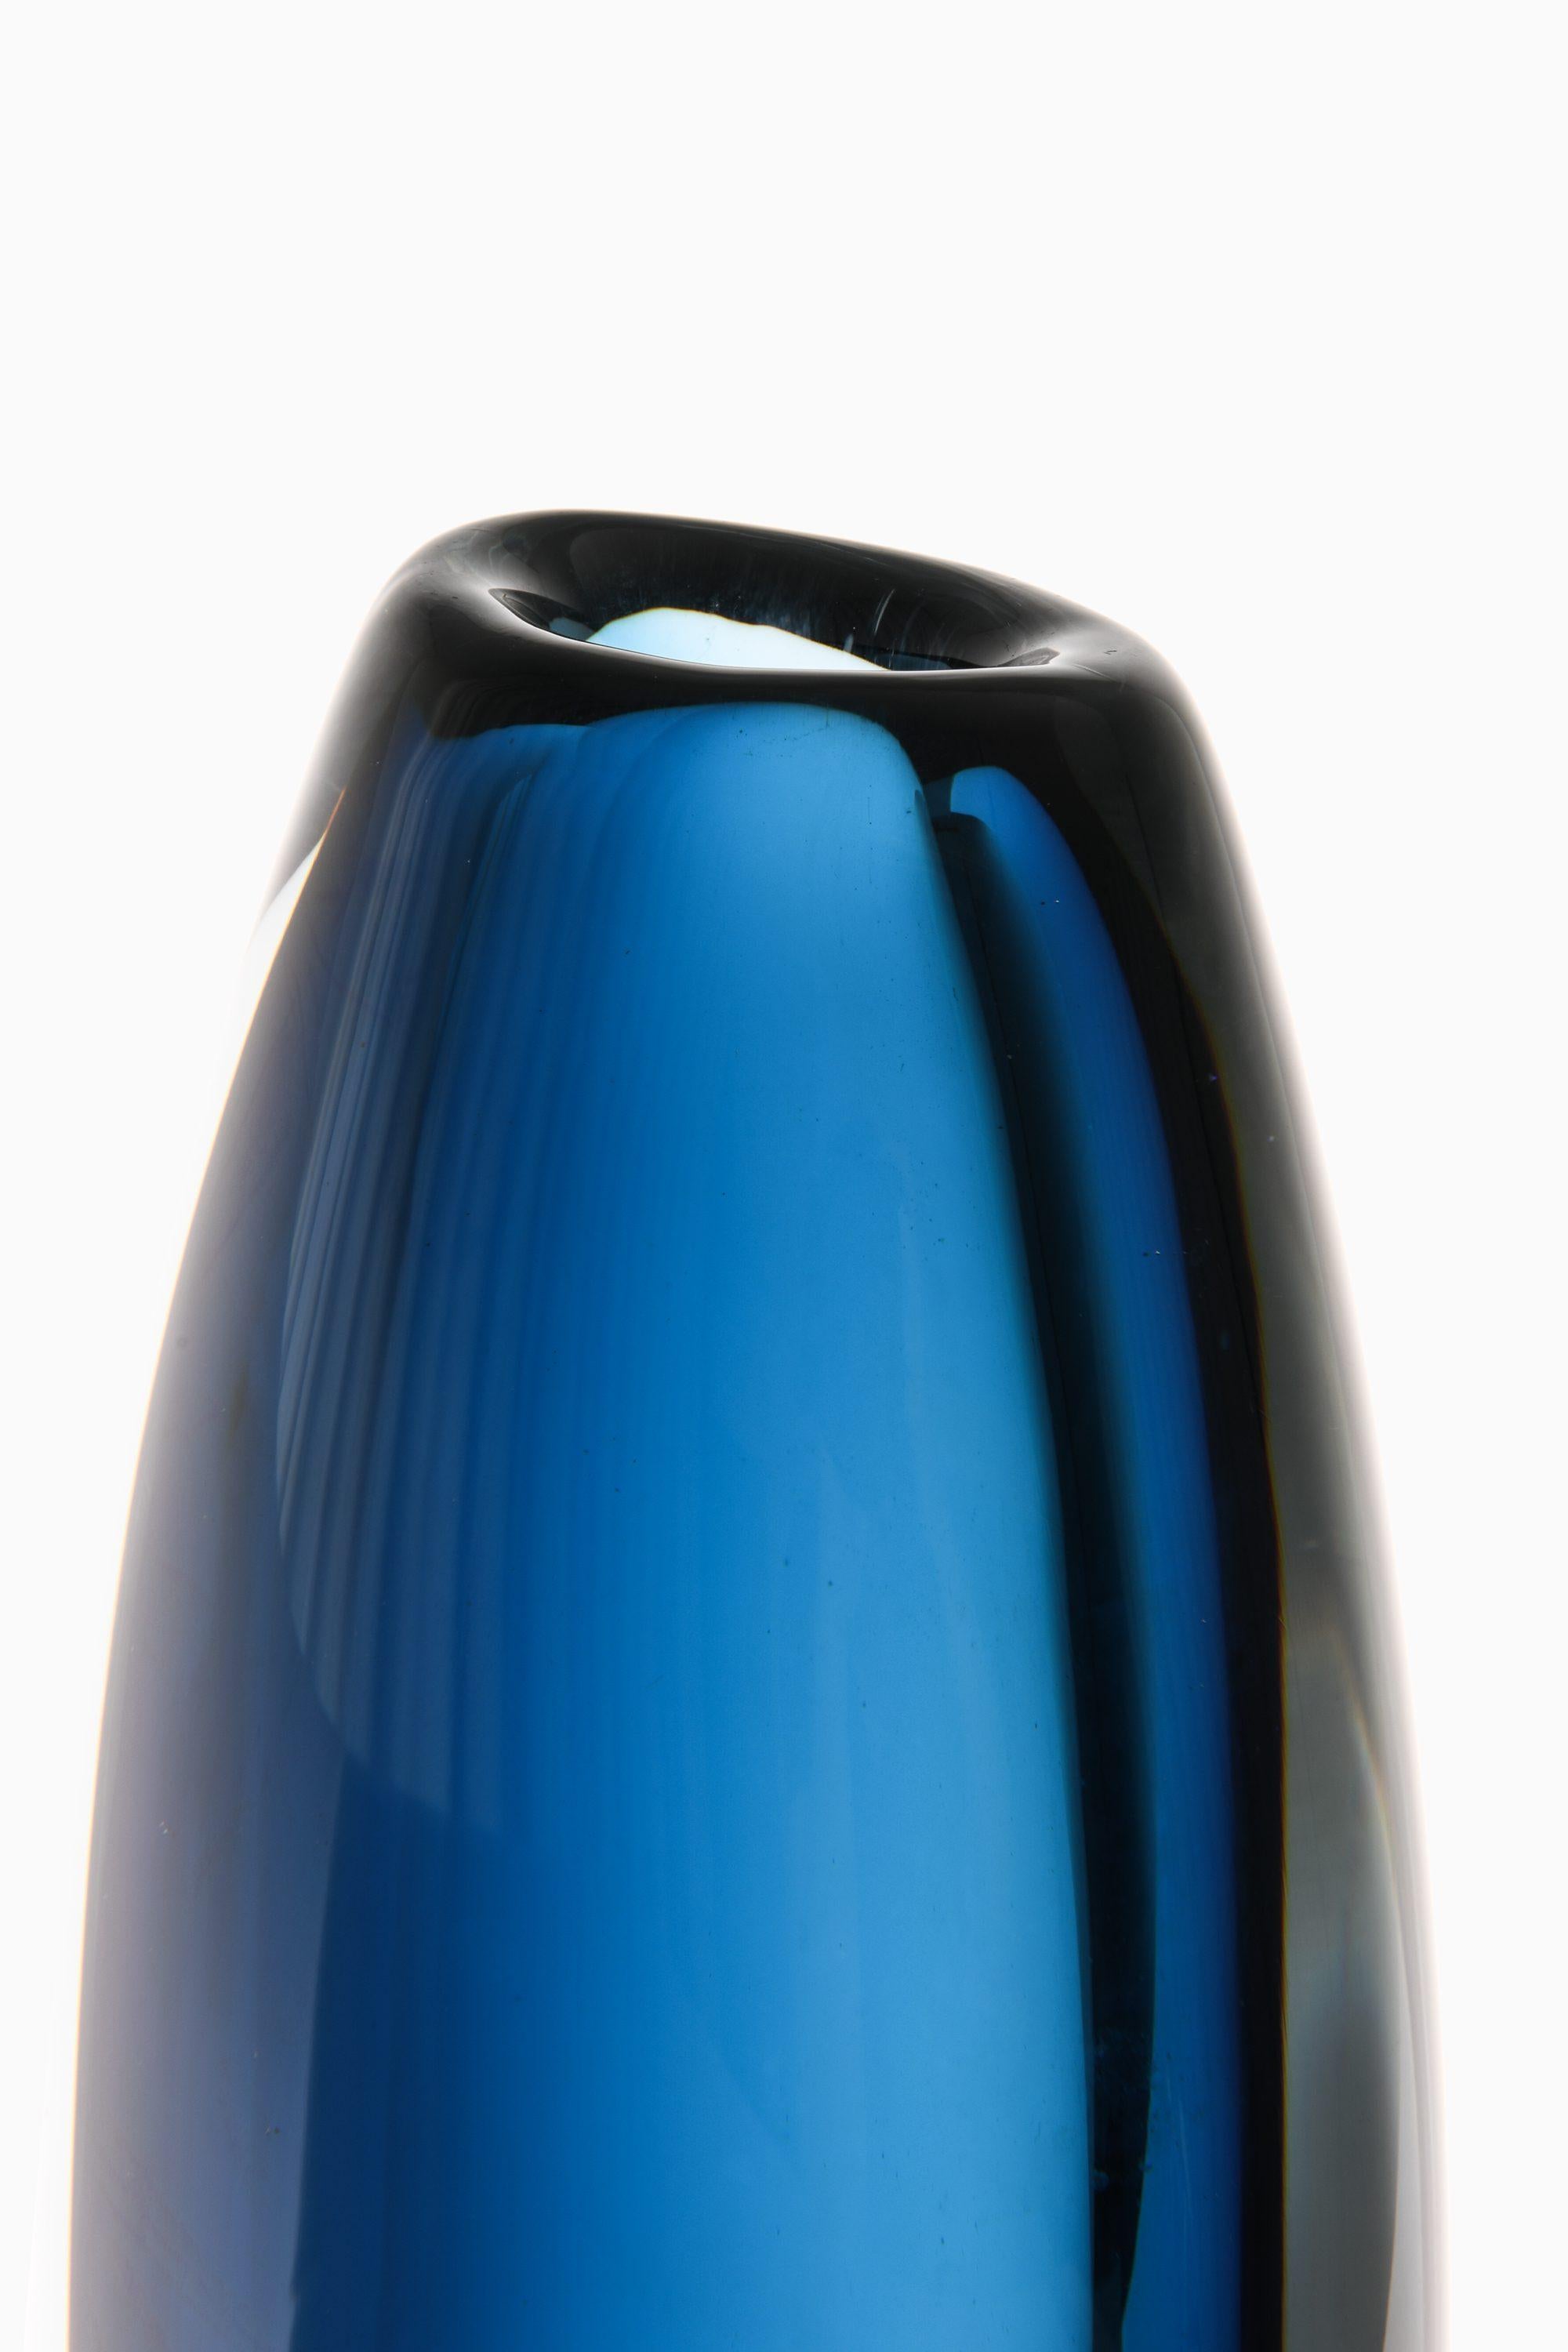 Dark Blue Glass Vase by Vicke Lindstrand, 1960's In Good Condition For Sale In Limhamn, Skåne län